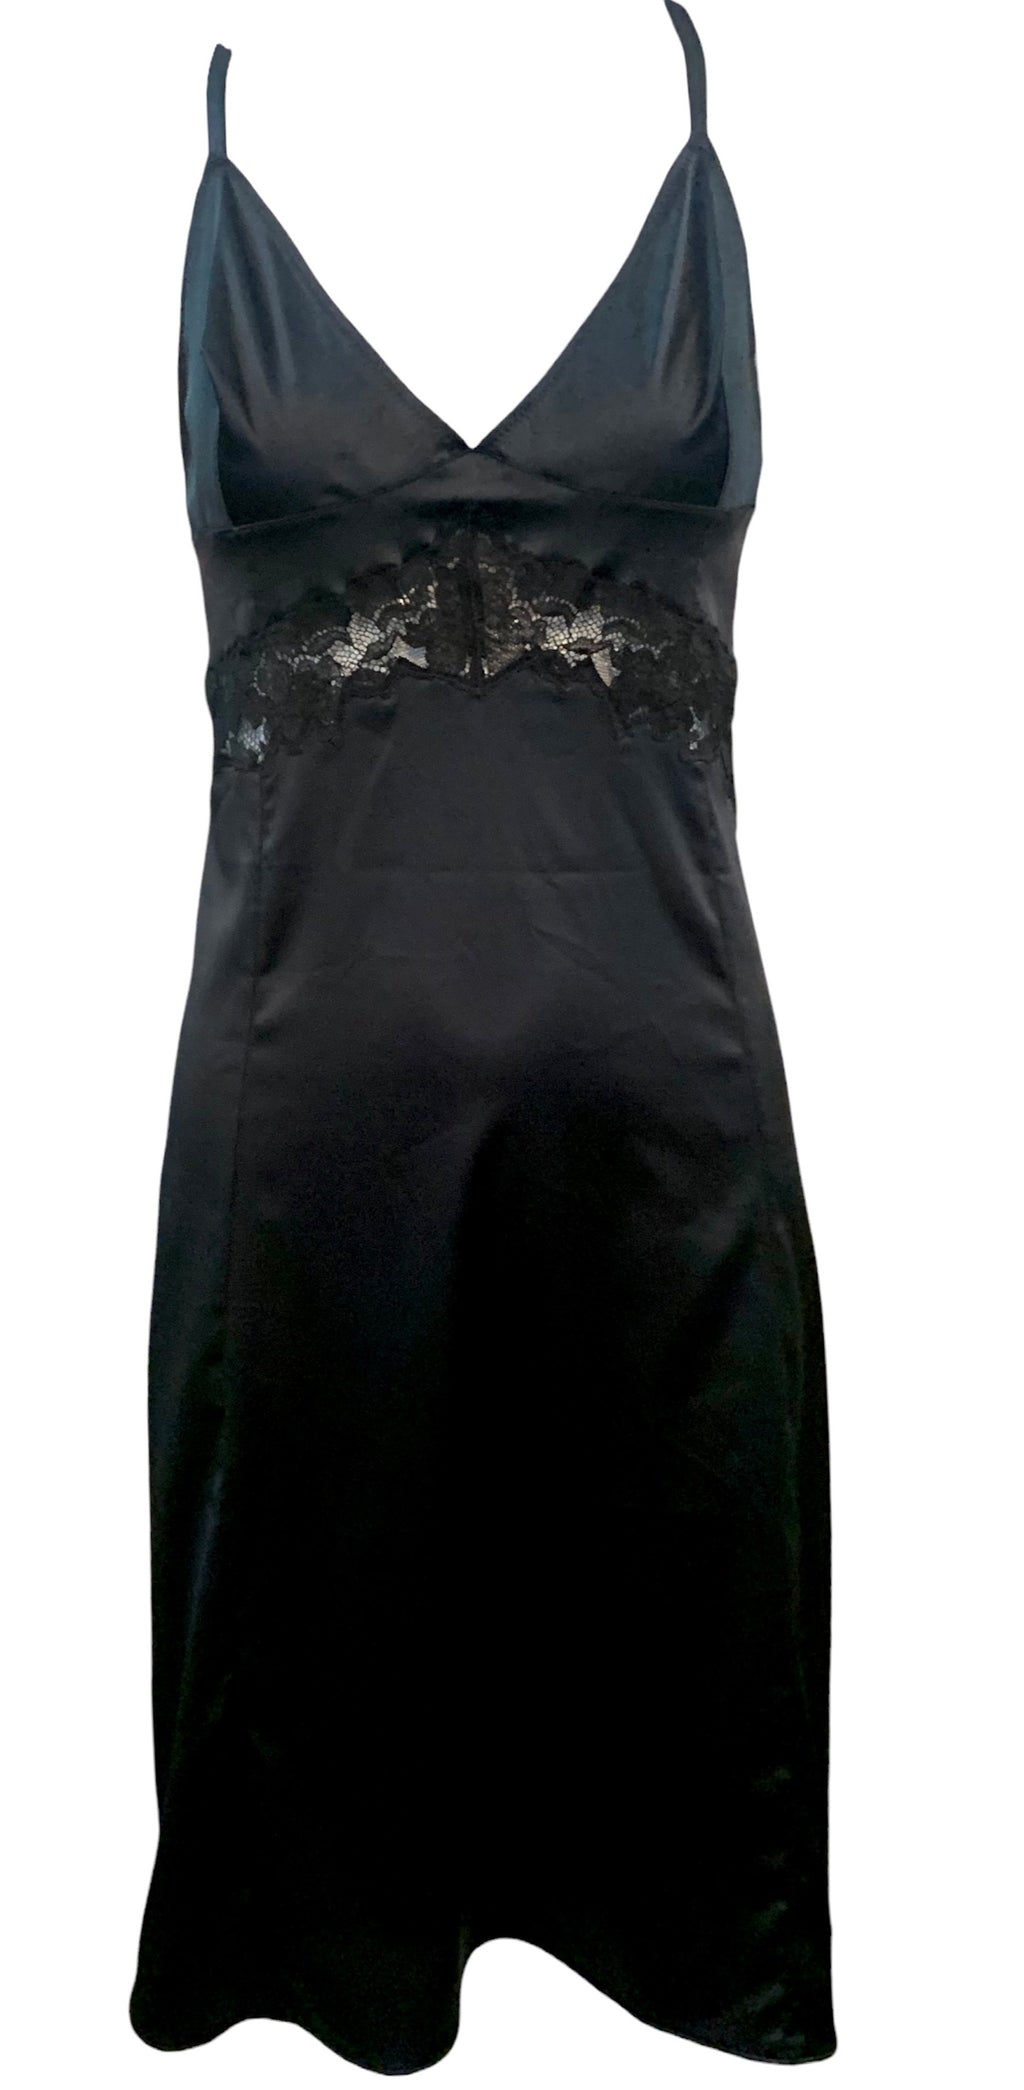    Dolce and Gabbana 90s Black Stretch Slip Dress FRONT 1 of 5 